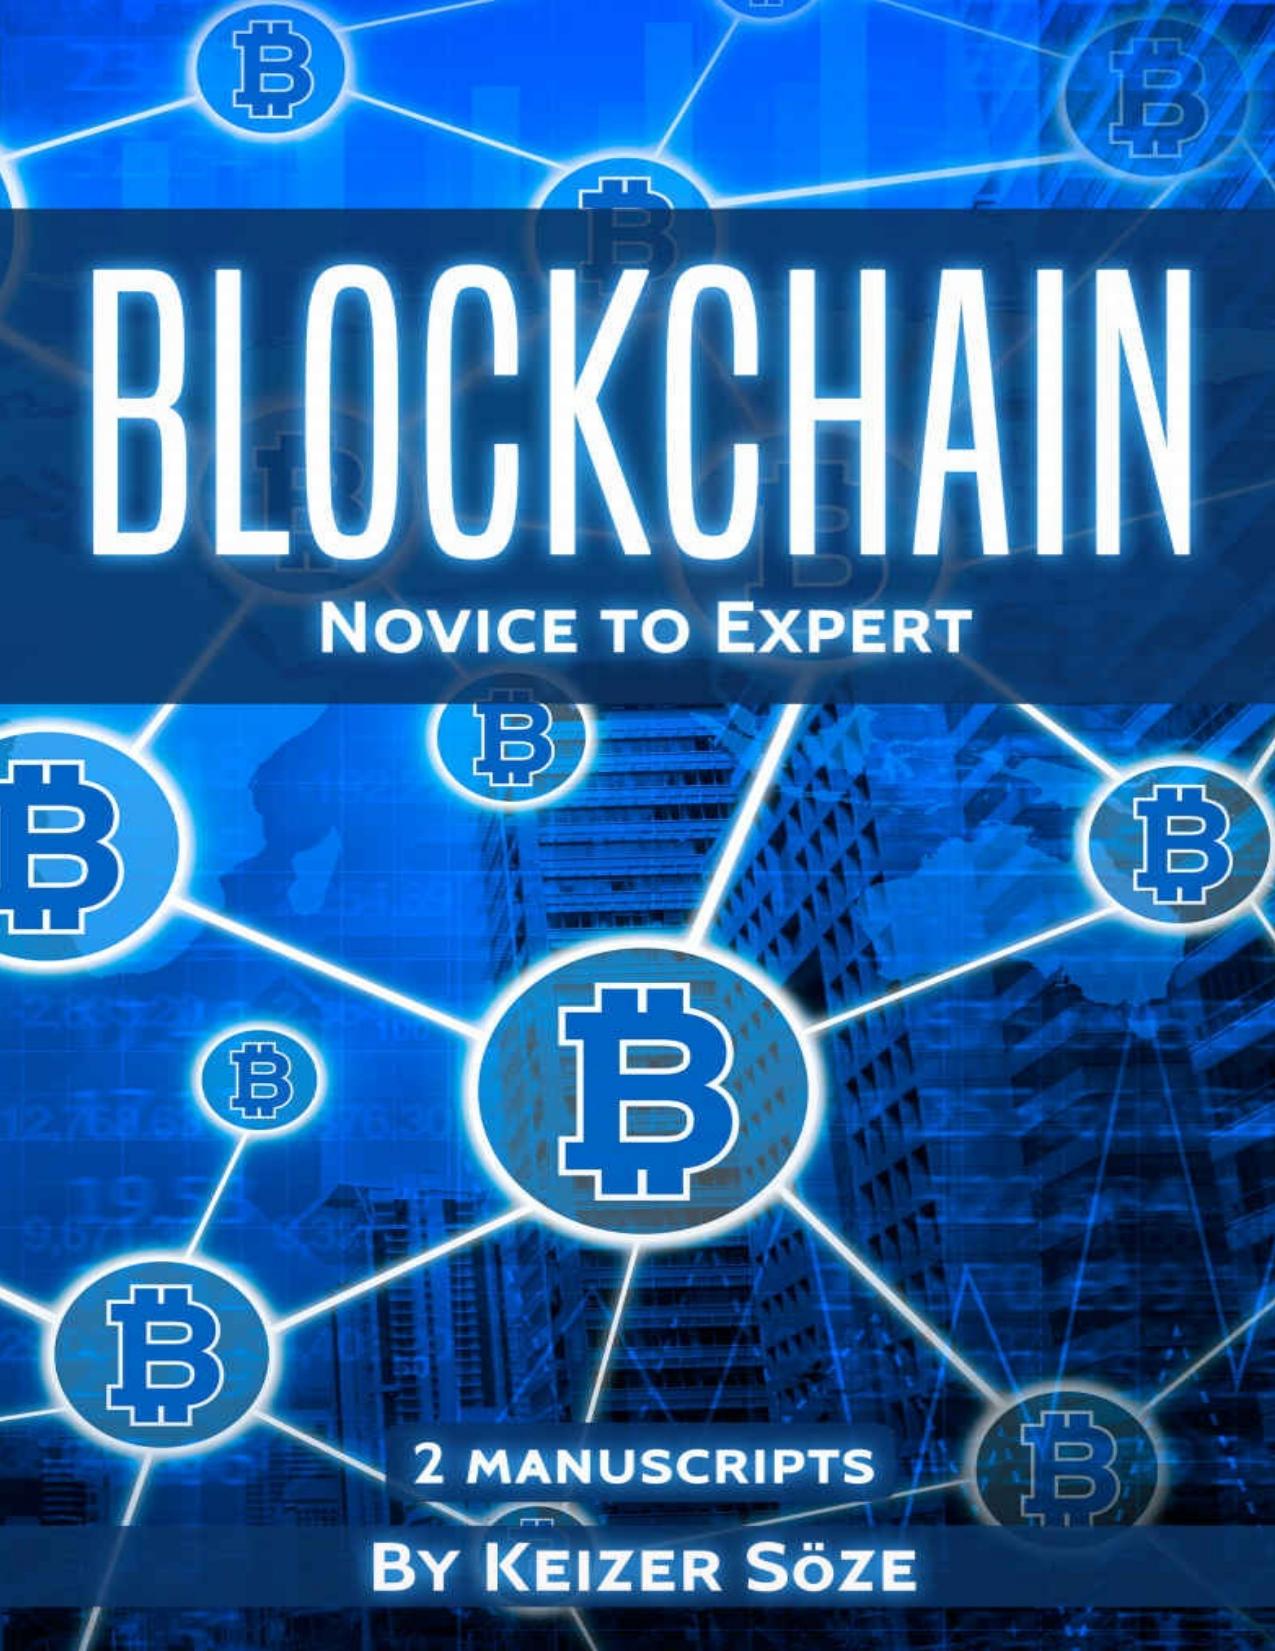 Blockchain: Ultimate Step By Step Guide To Understanding Blockchain Technology, Bitcoin Creation, and the future of Money - PDFDrive.com